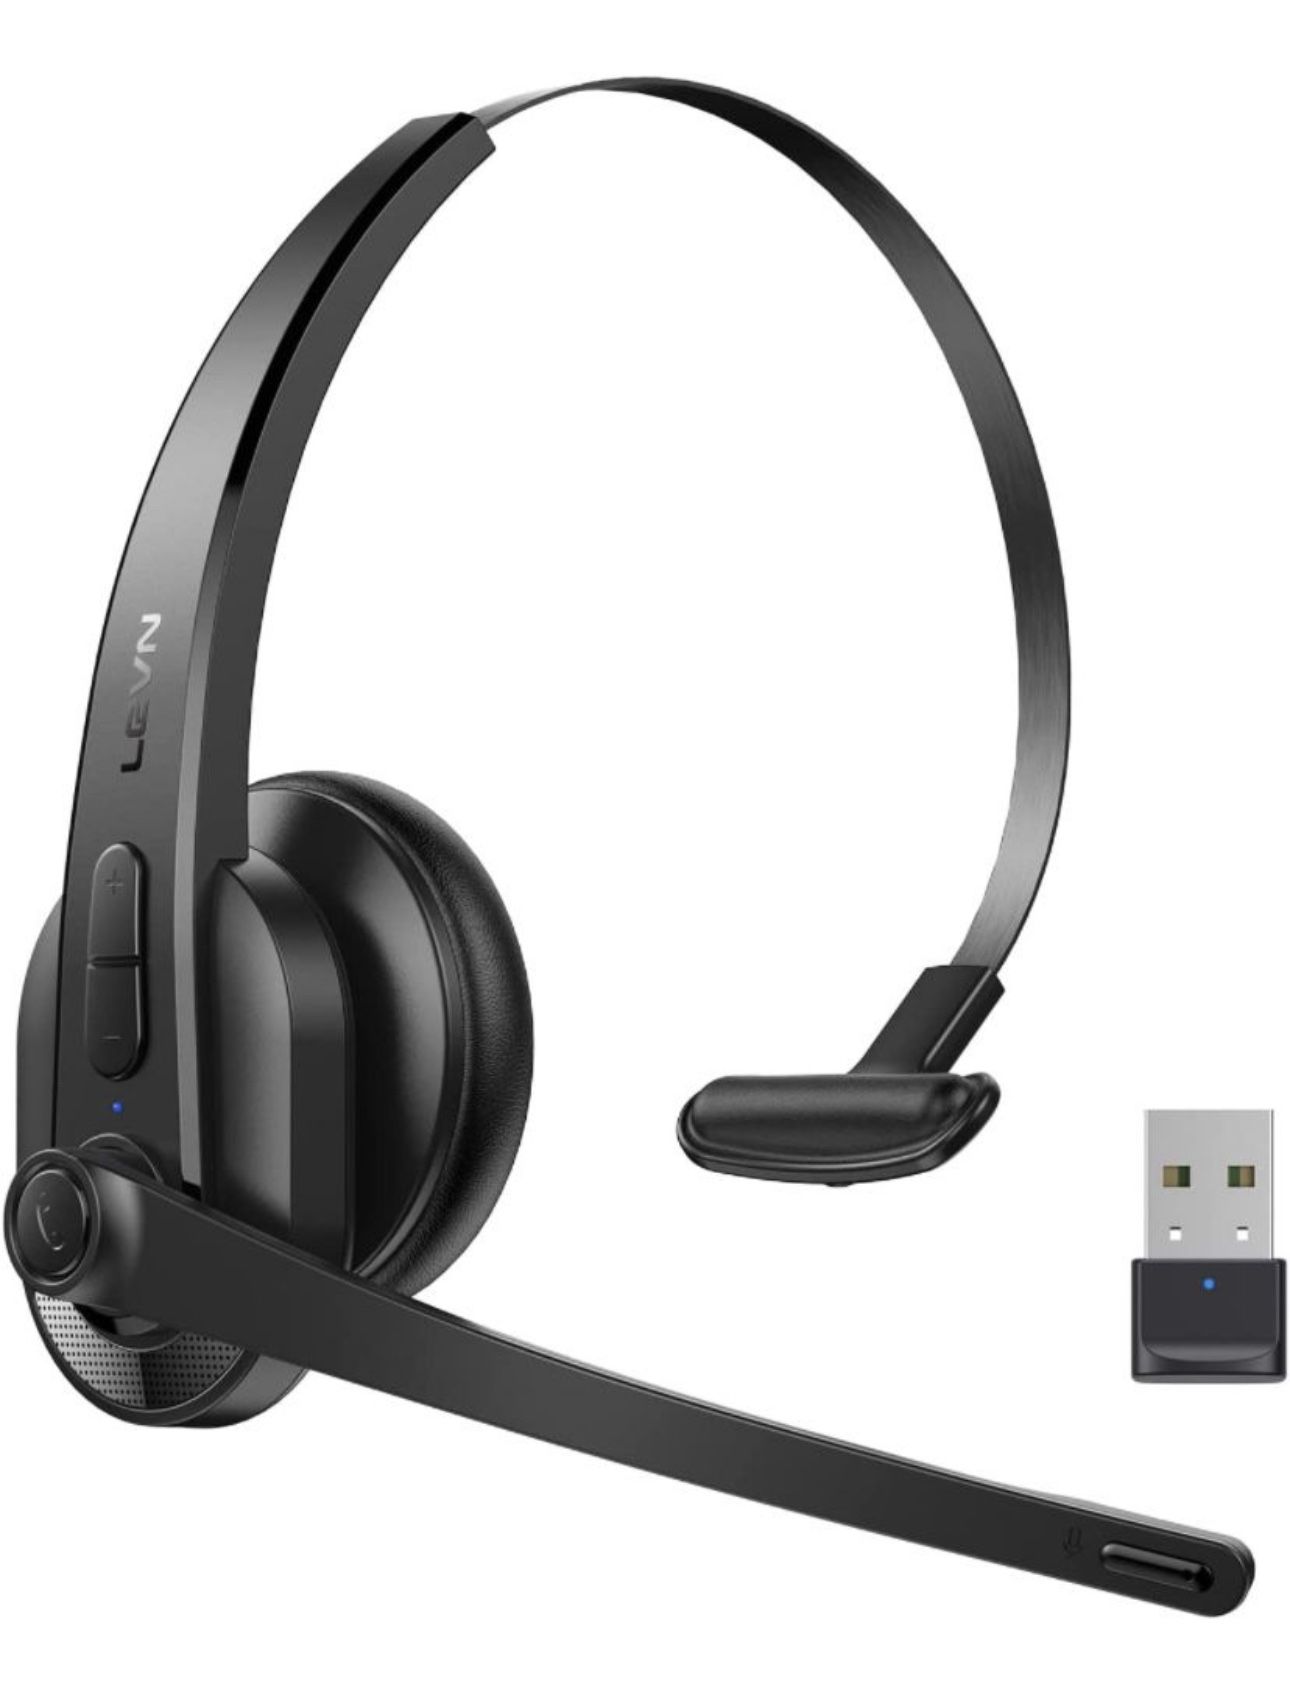 LEVN Wireless Headset, Bluetooth Headset with Microphone AI Noise Canceling & Mute Button, 35Hrs On-Ear Bluetooth Headphones with USB for Call Center/